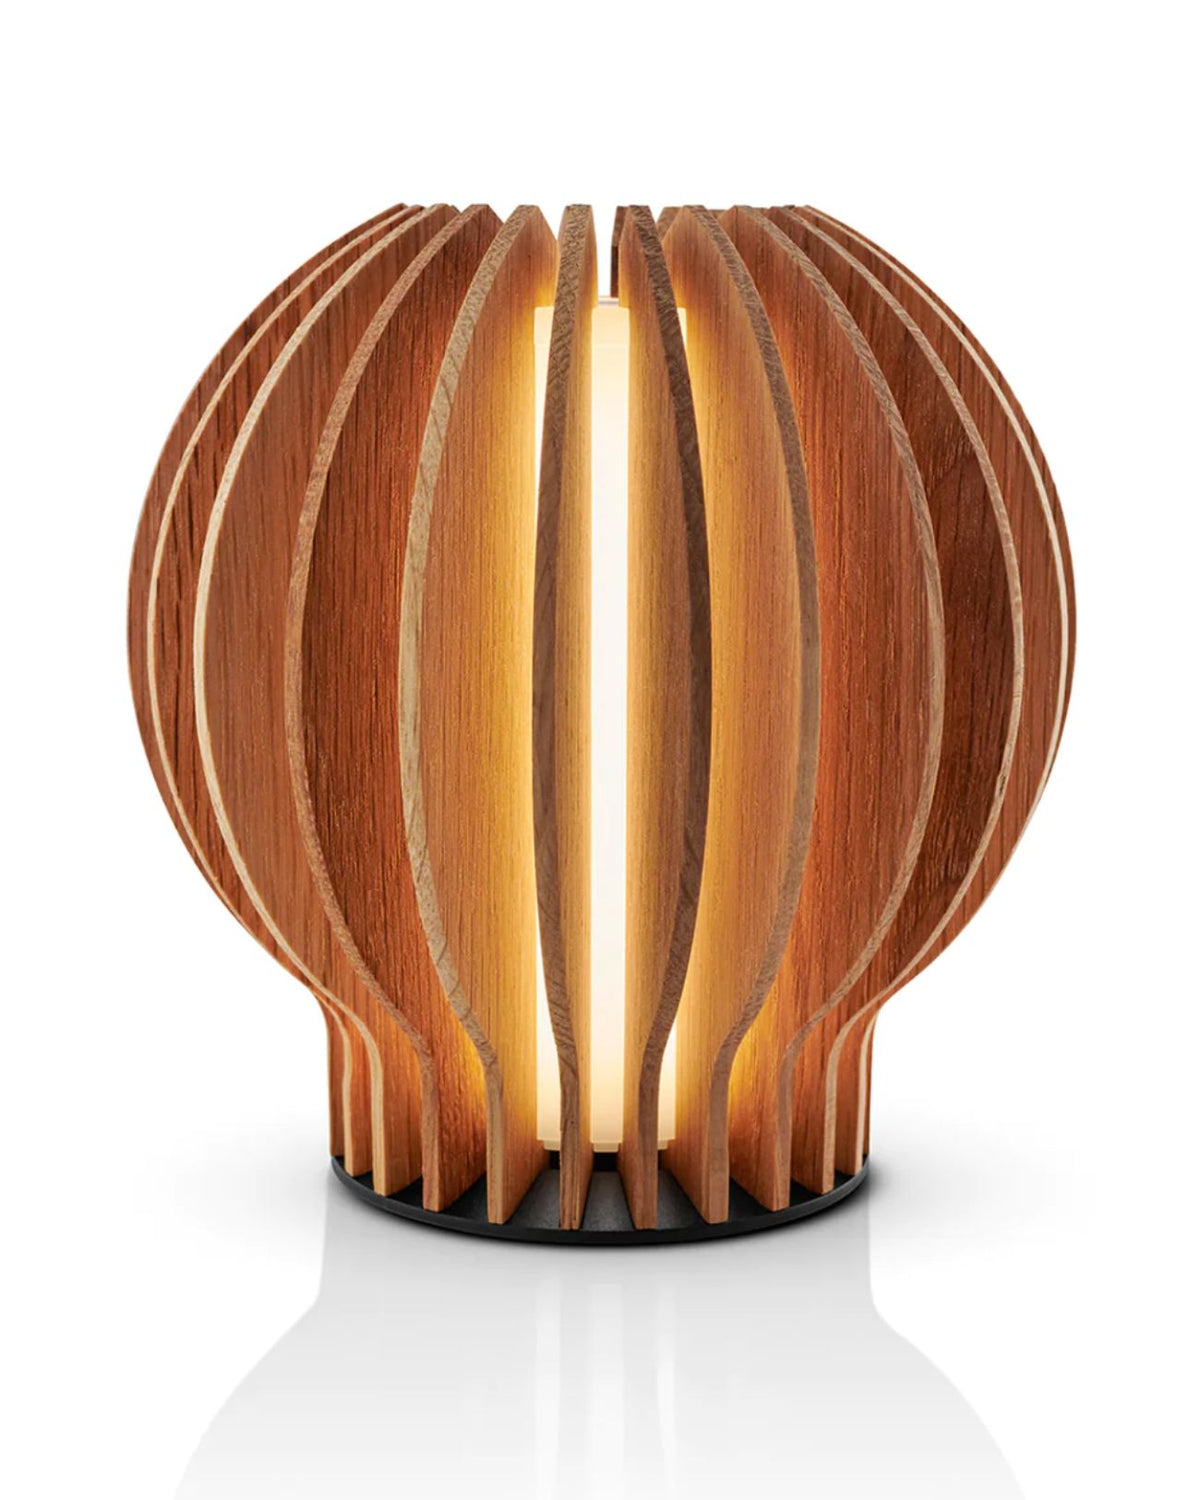 The Radiant Round Oak Table Lamp is a cordless table lamp, and is the perfect architectural light to finish off your kid's bedside tables or bookcases. The gorgeous orb shape is just brilliant (pardon the pun!).  Easy to operate with a touch-sensitive switch at the top for choosing between three brightness levels. Provides 7 hours of illumination at full brightness on just one charge. Easy to charge – simply place the lamp on the accompanying base and charge via the USB socket